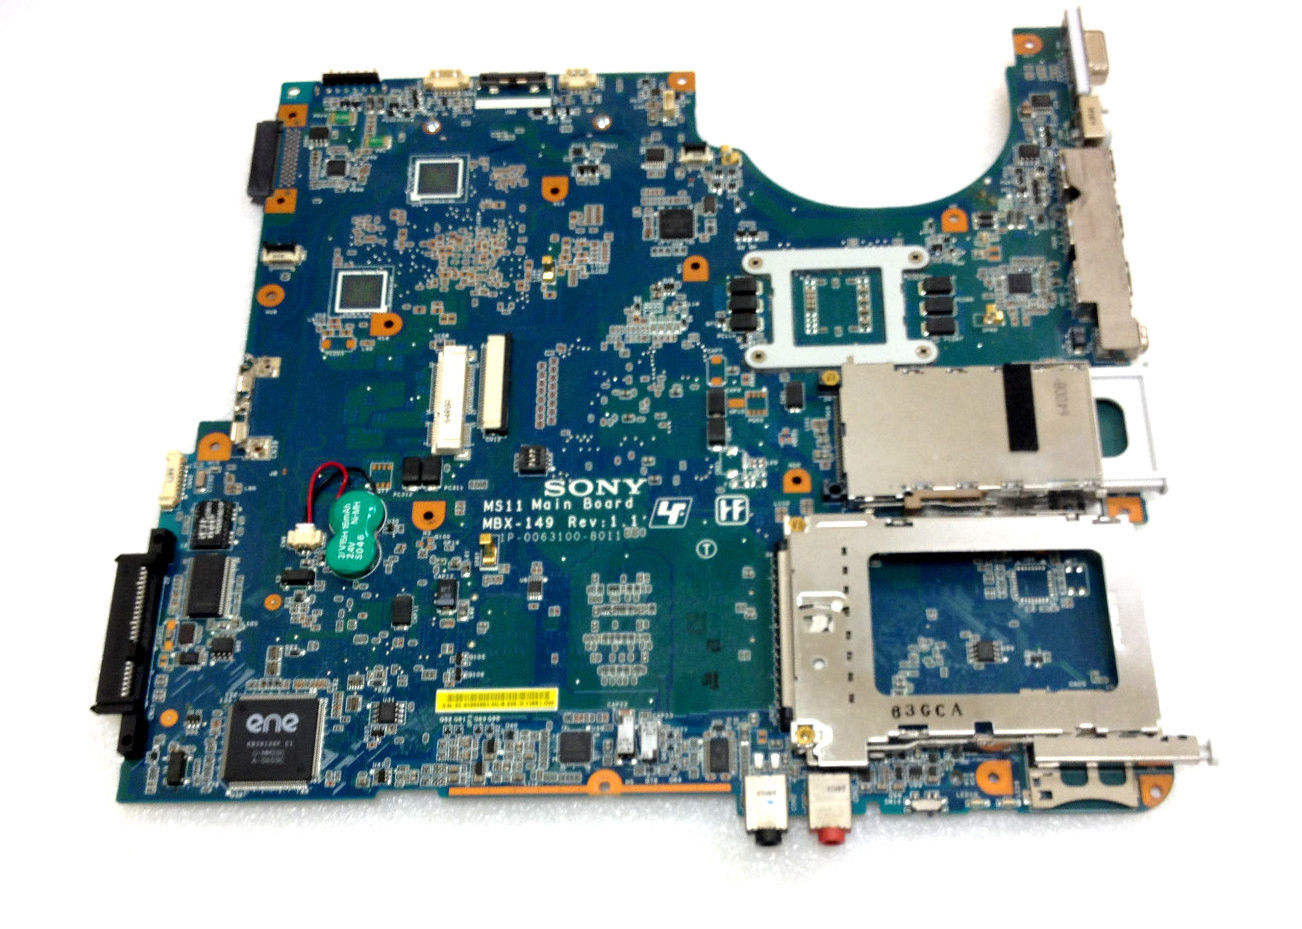 A1229523A Sony Vaio VGN-FE MBX-149 intel Motherboard 1P-006B500-8011 GENUINE Compatible CPU Brand: Intel Nu - Click Image to Close